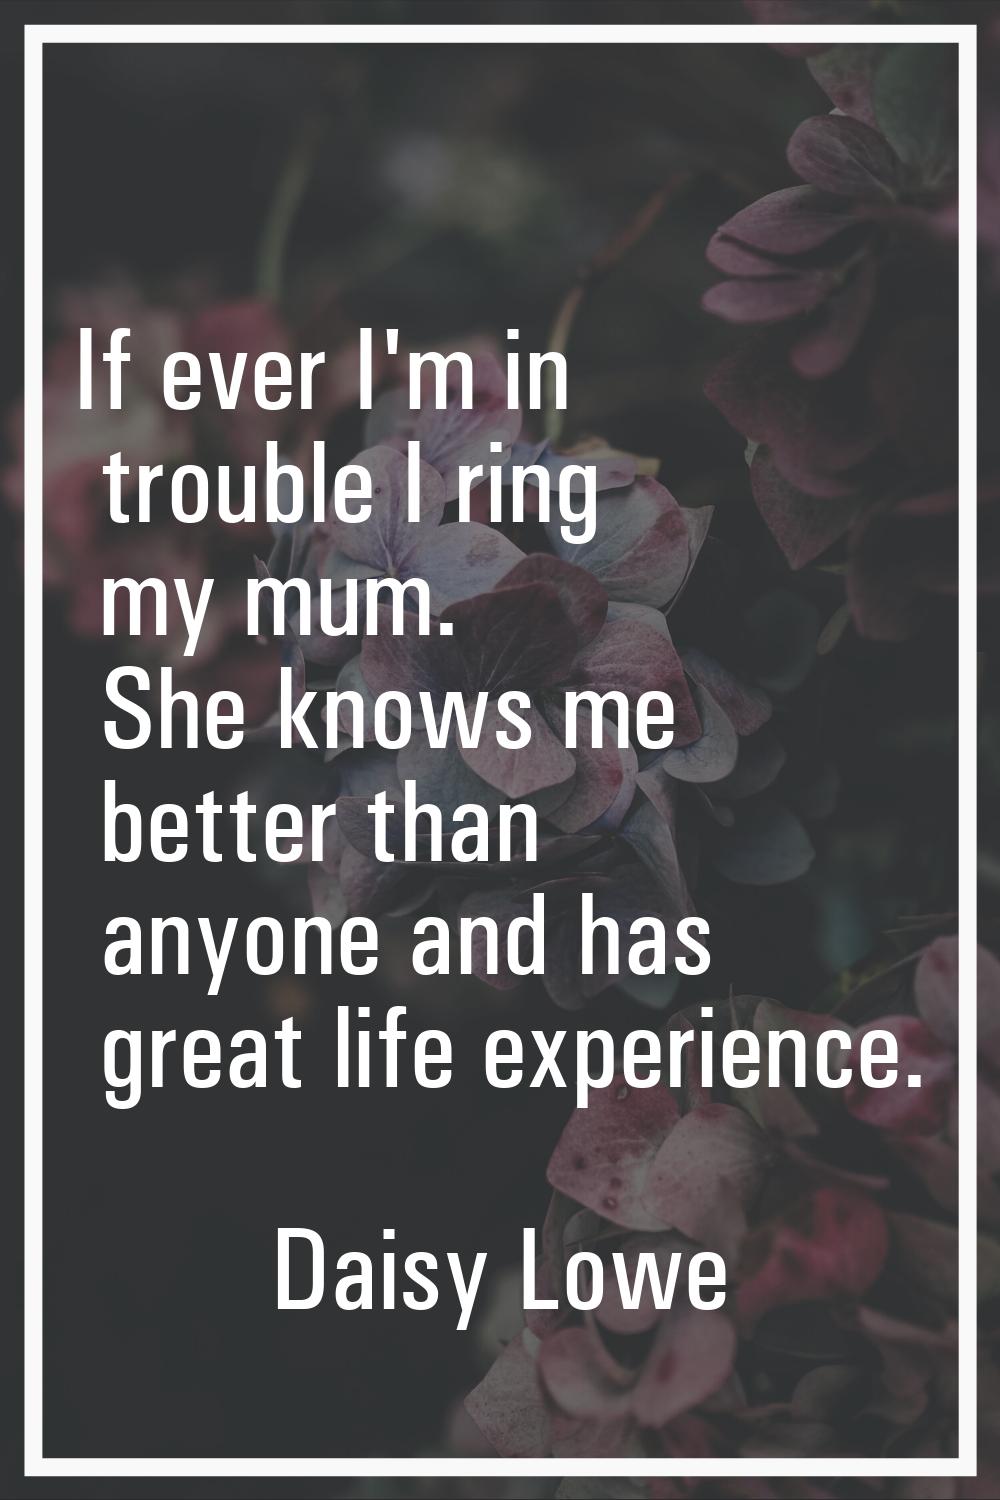 If ever I'm in trouble I ring my mum. She knows me better than anyone and has great life experience